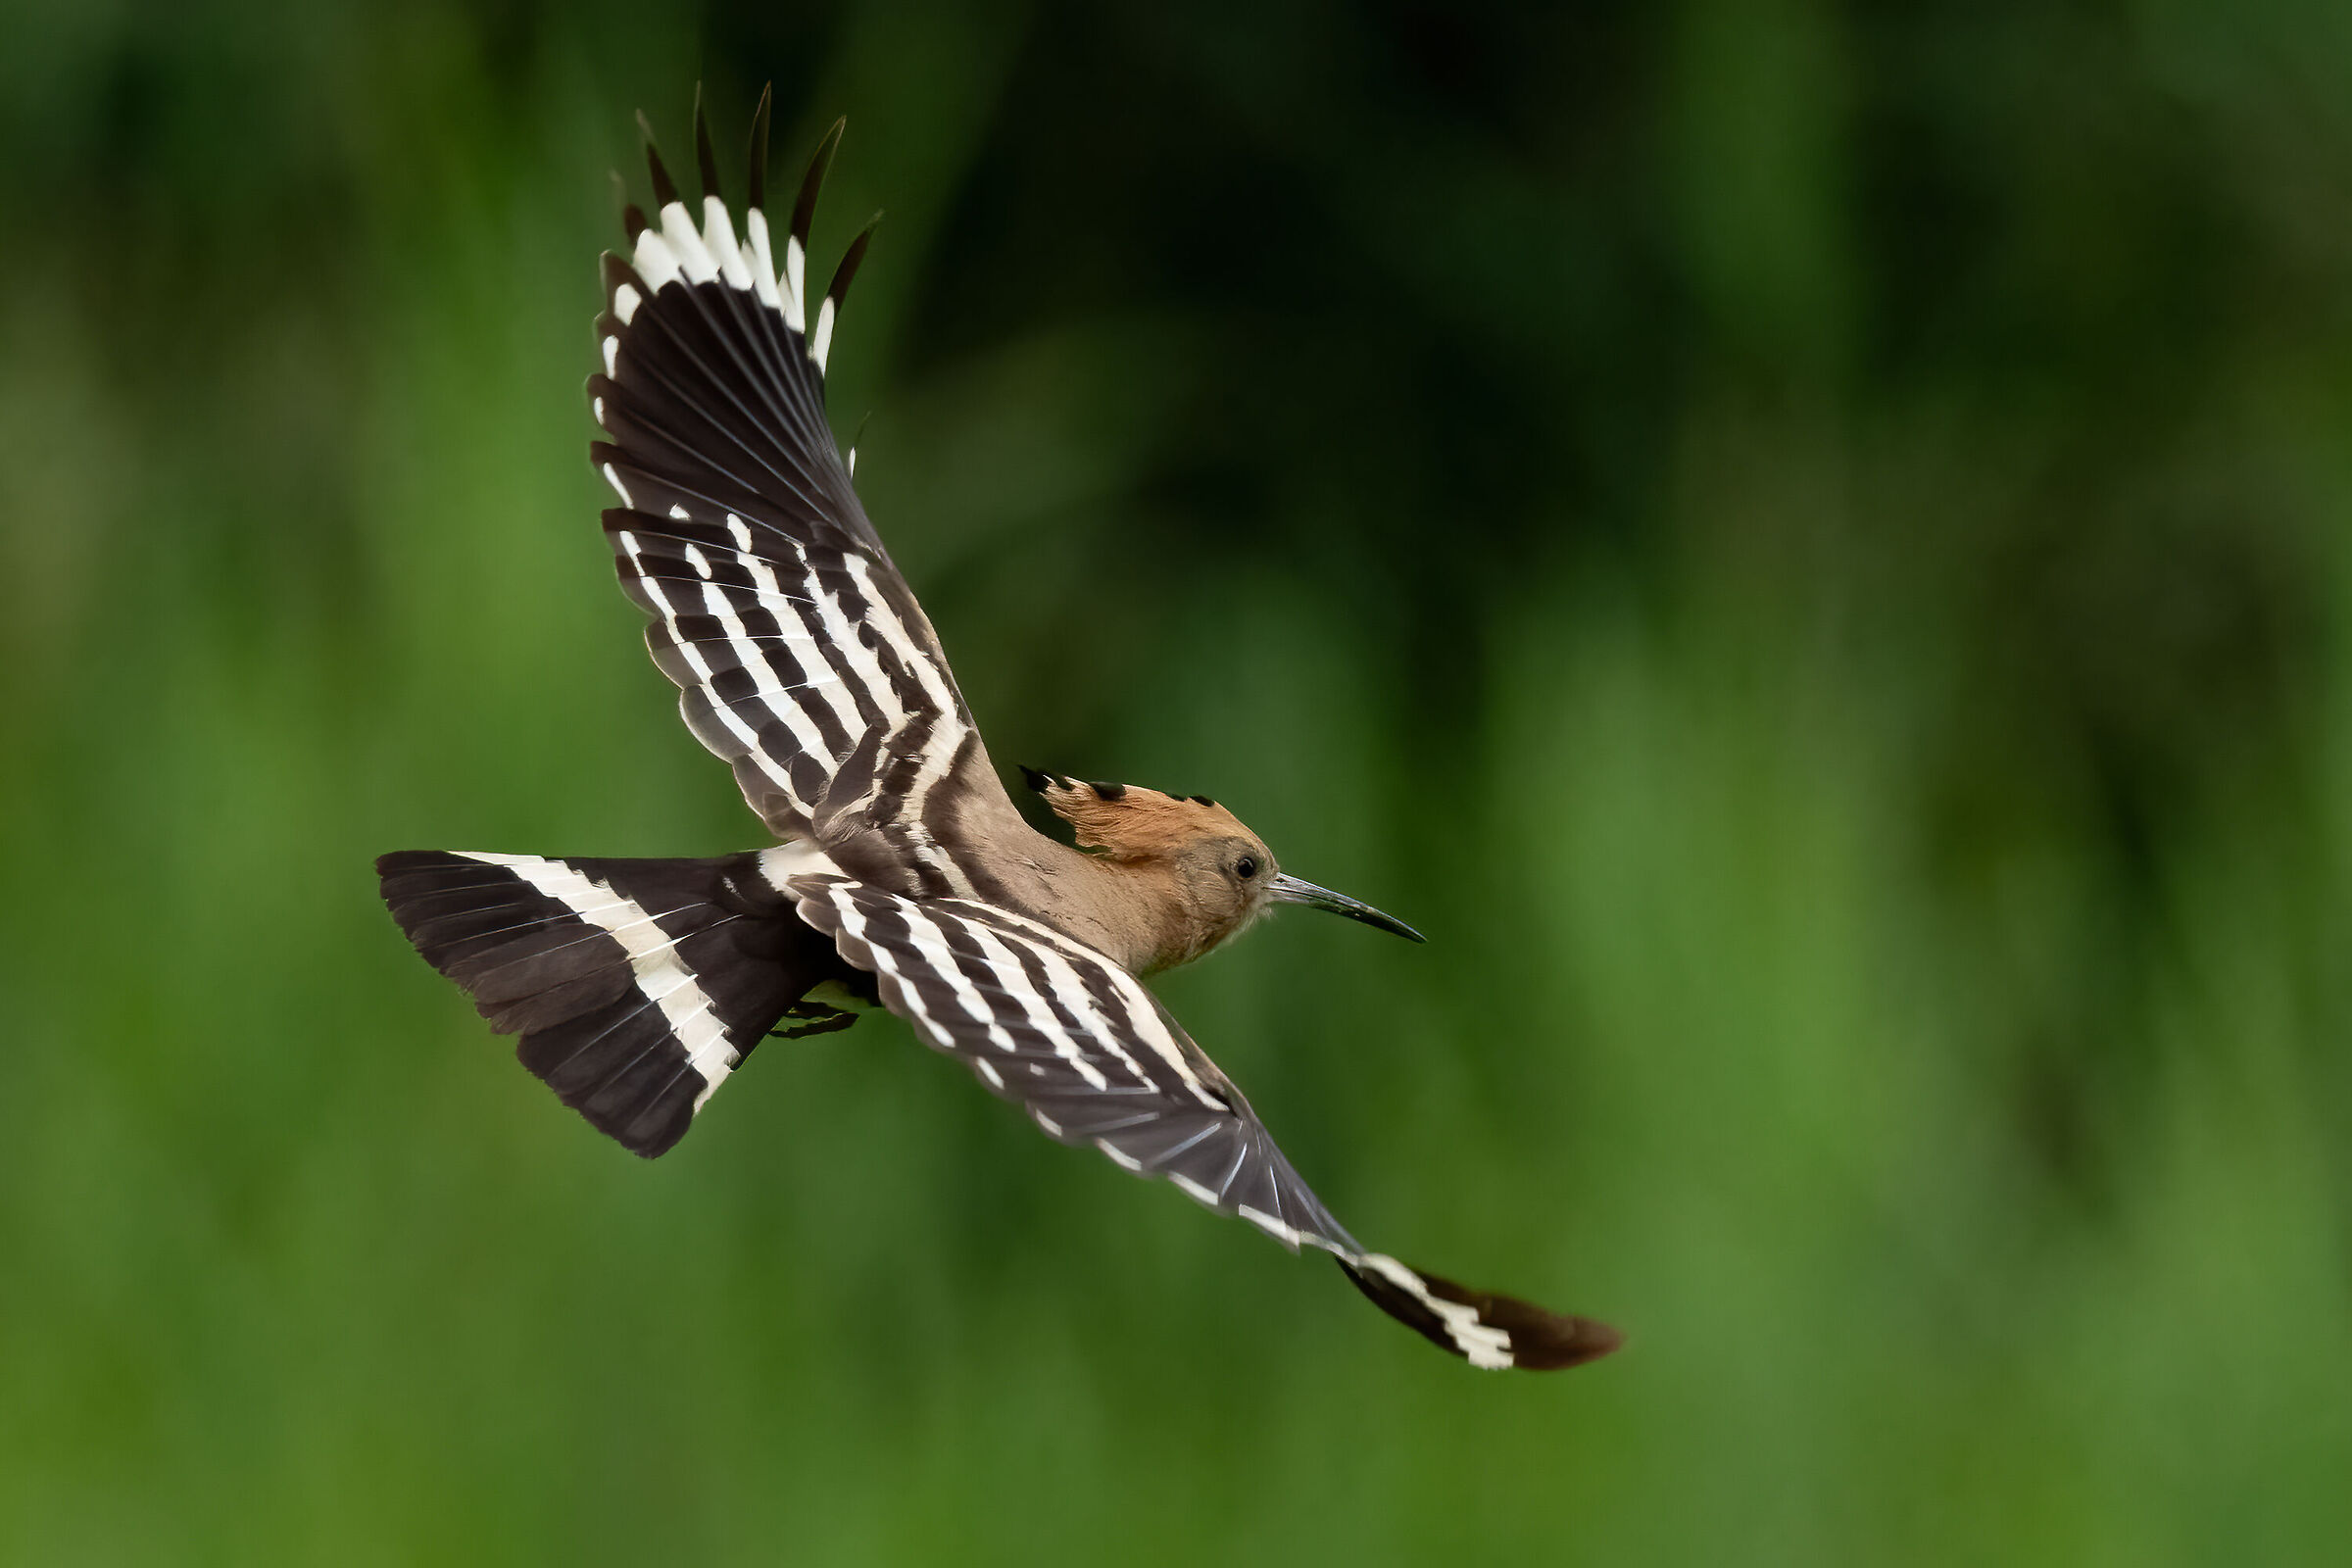 Hoopoe first shots with Z8...